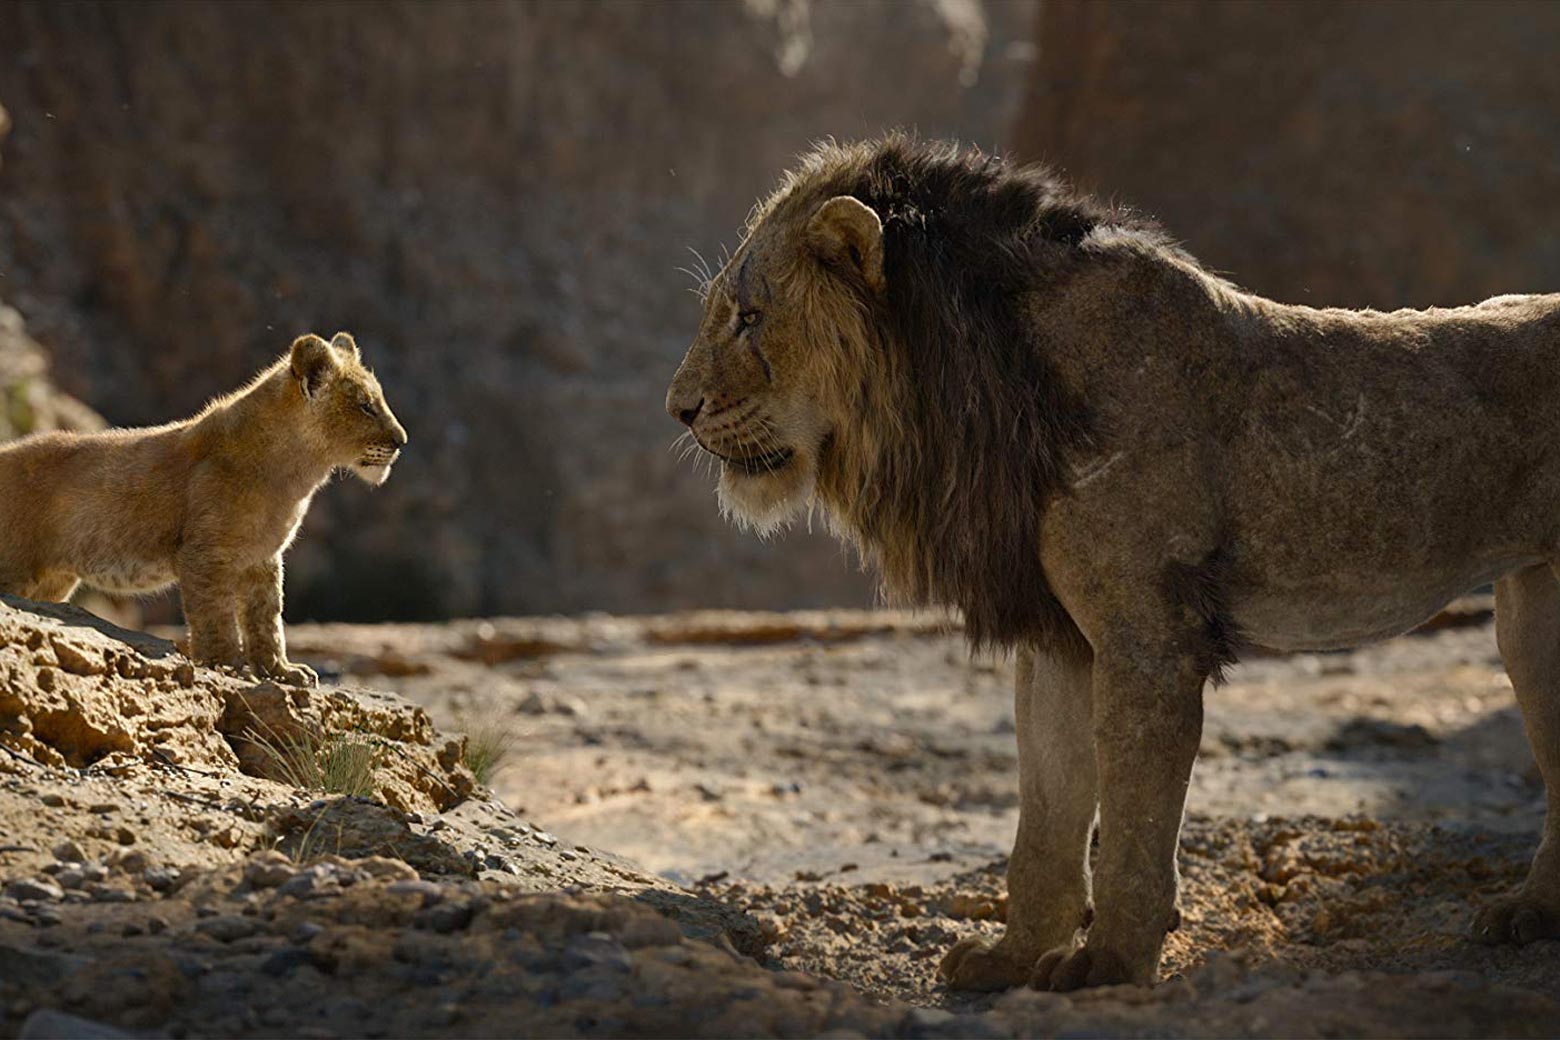 Two lions, one young and one older, in The Lion King.